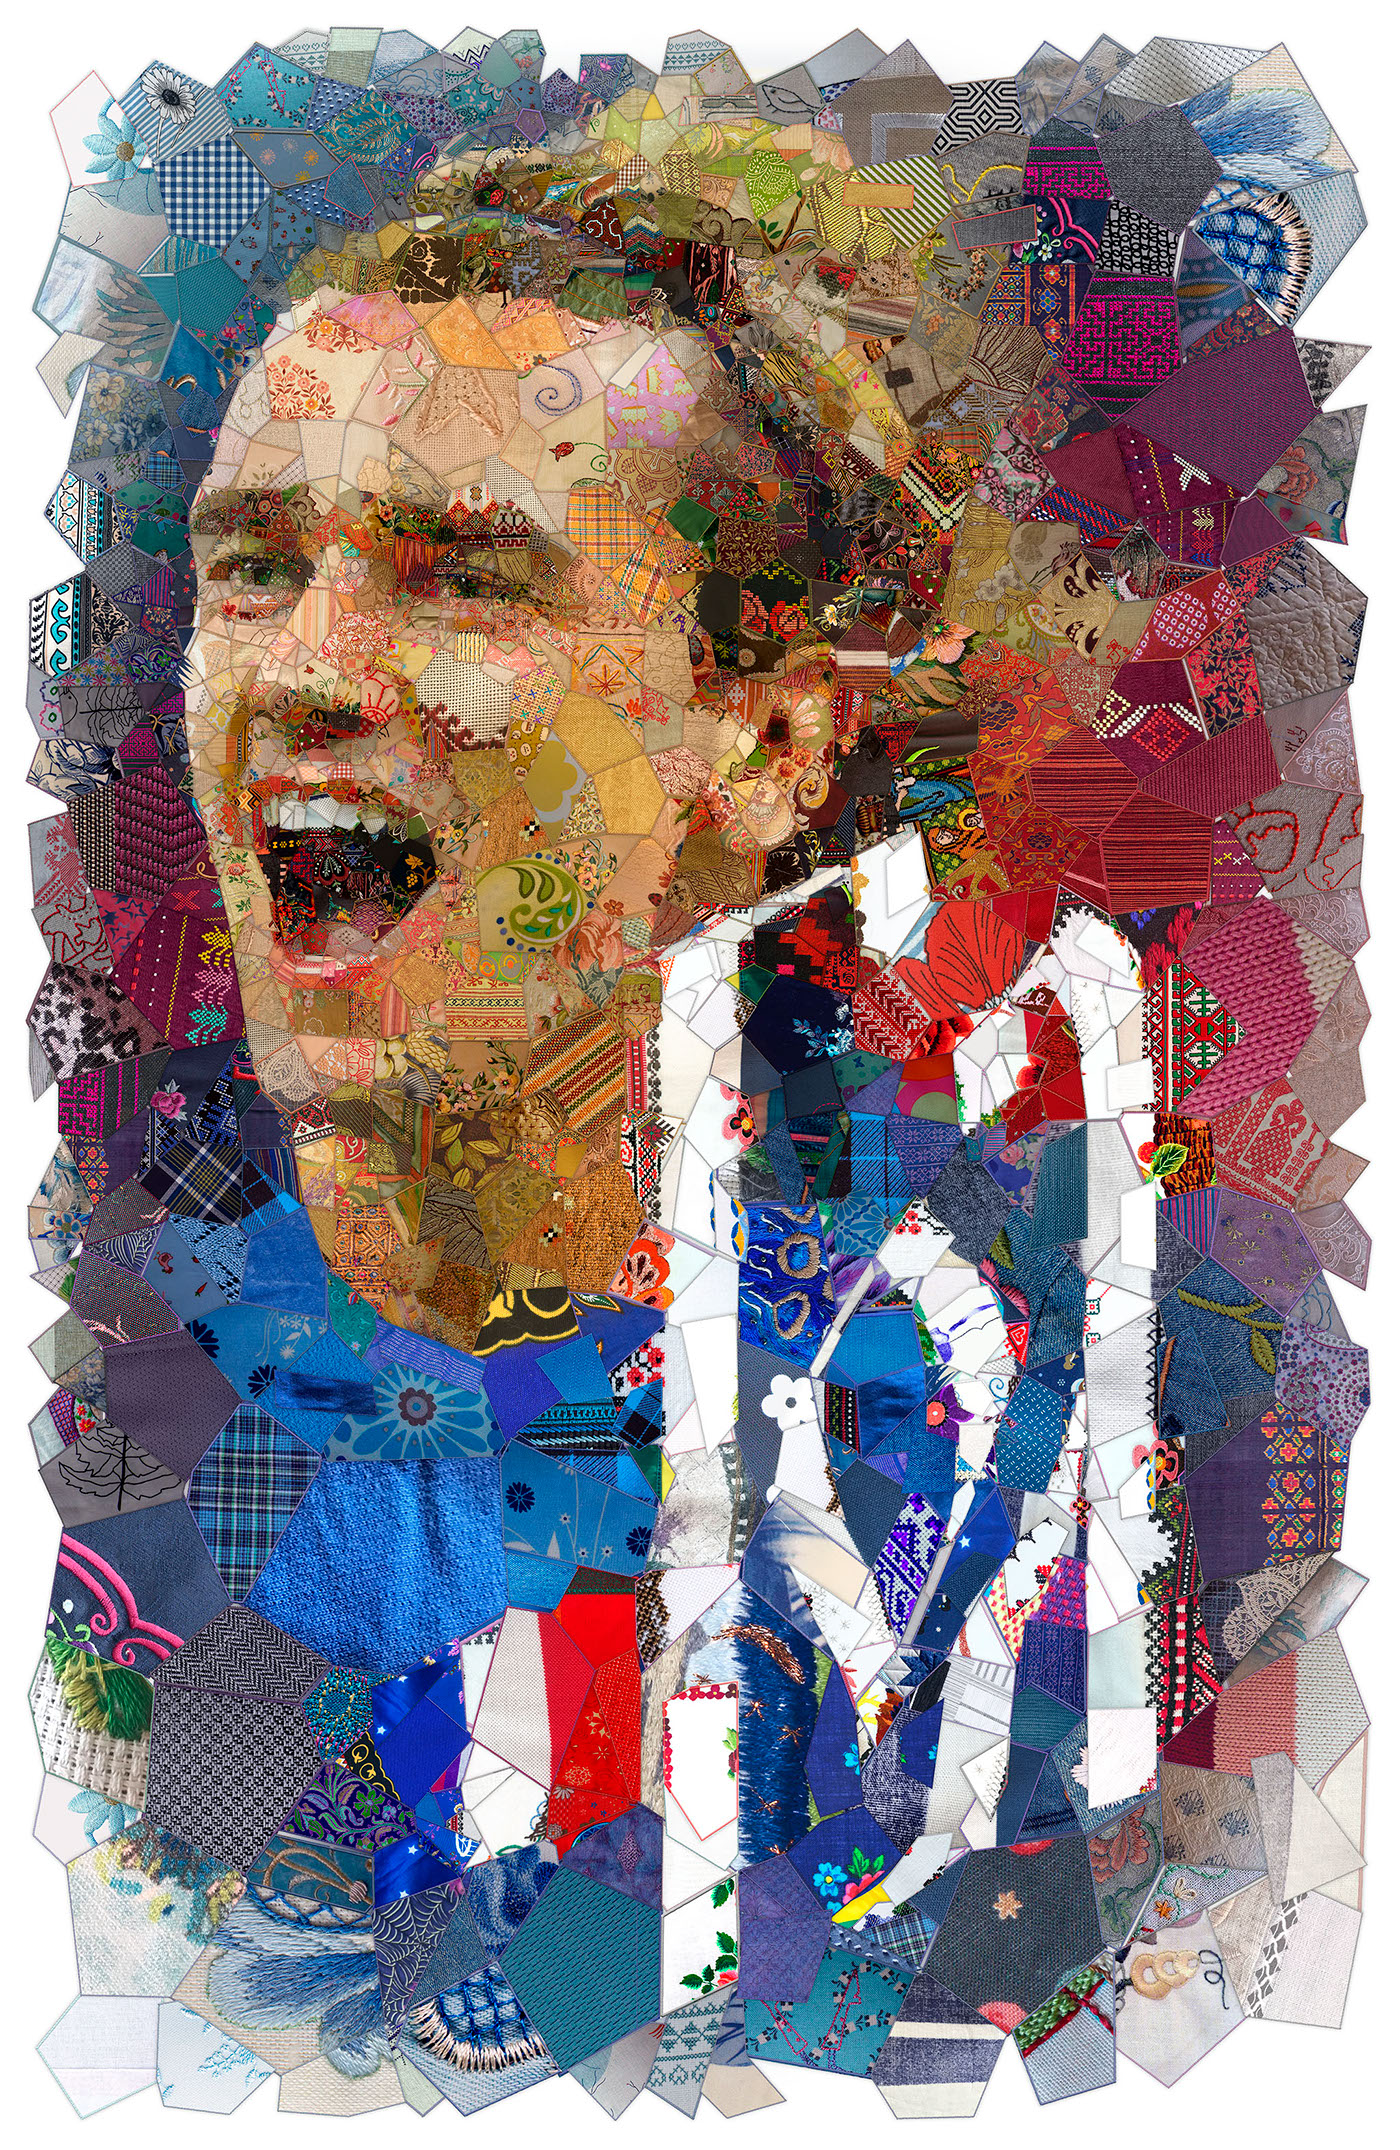 mosaic photomosaic quilting visual design football Soccer Art FIFA World Cup Russia 2018 collage digital embroidery